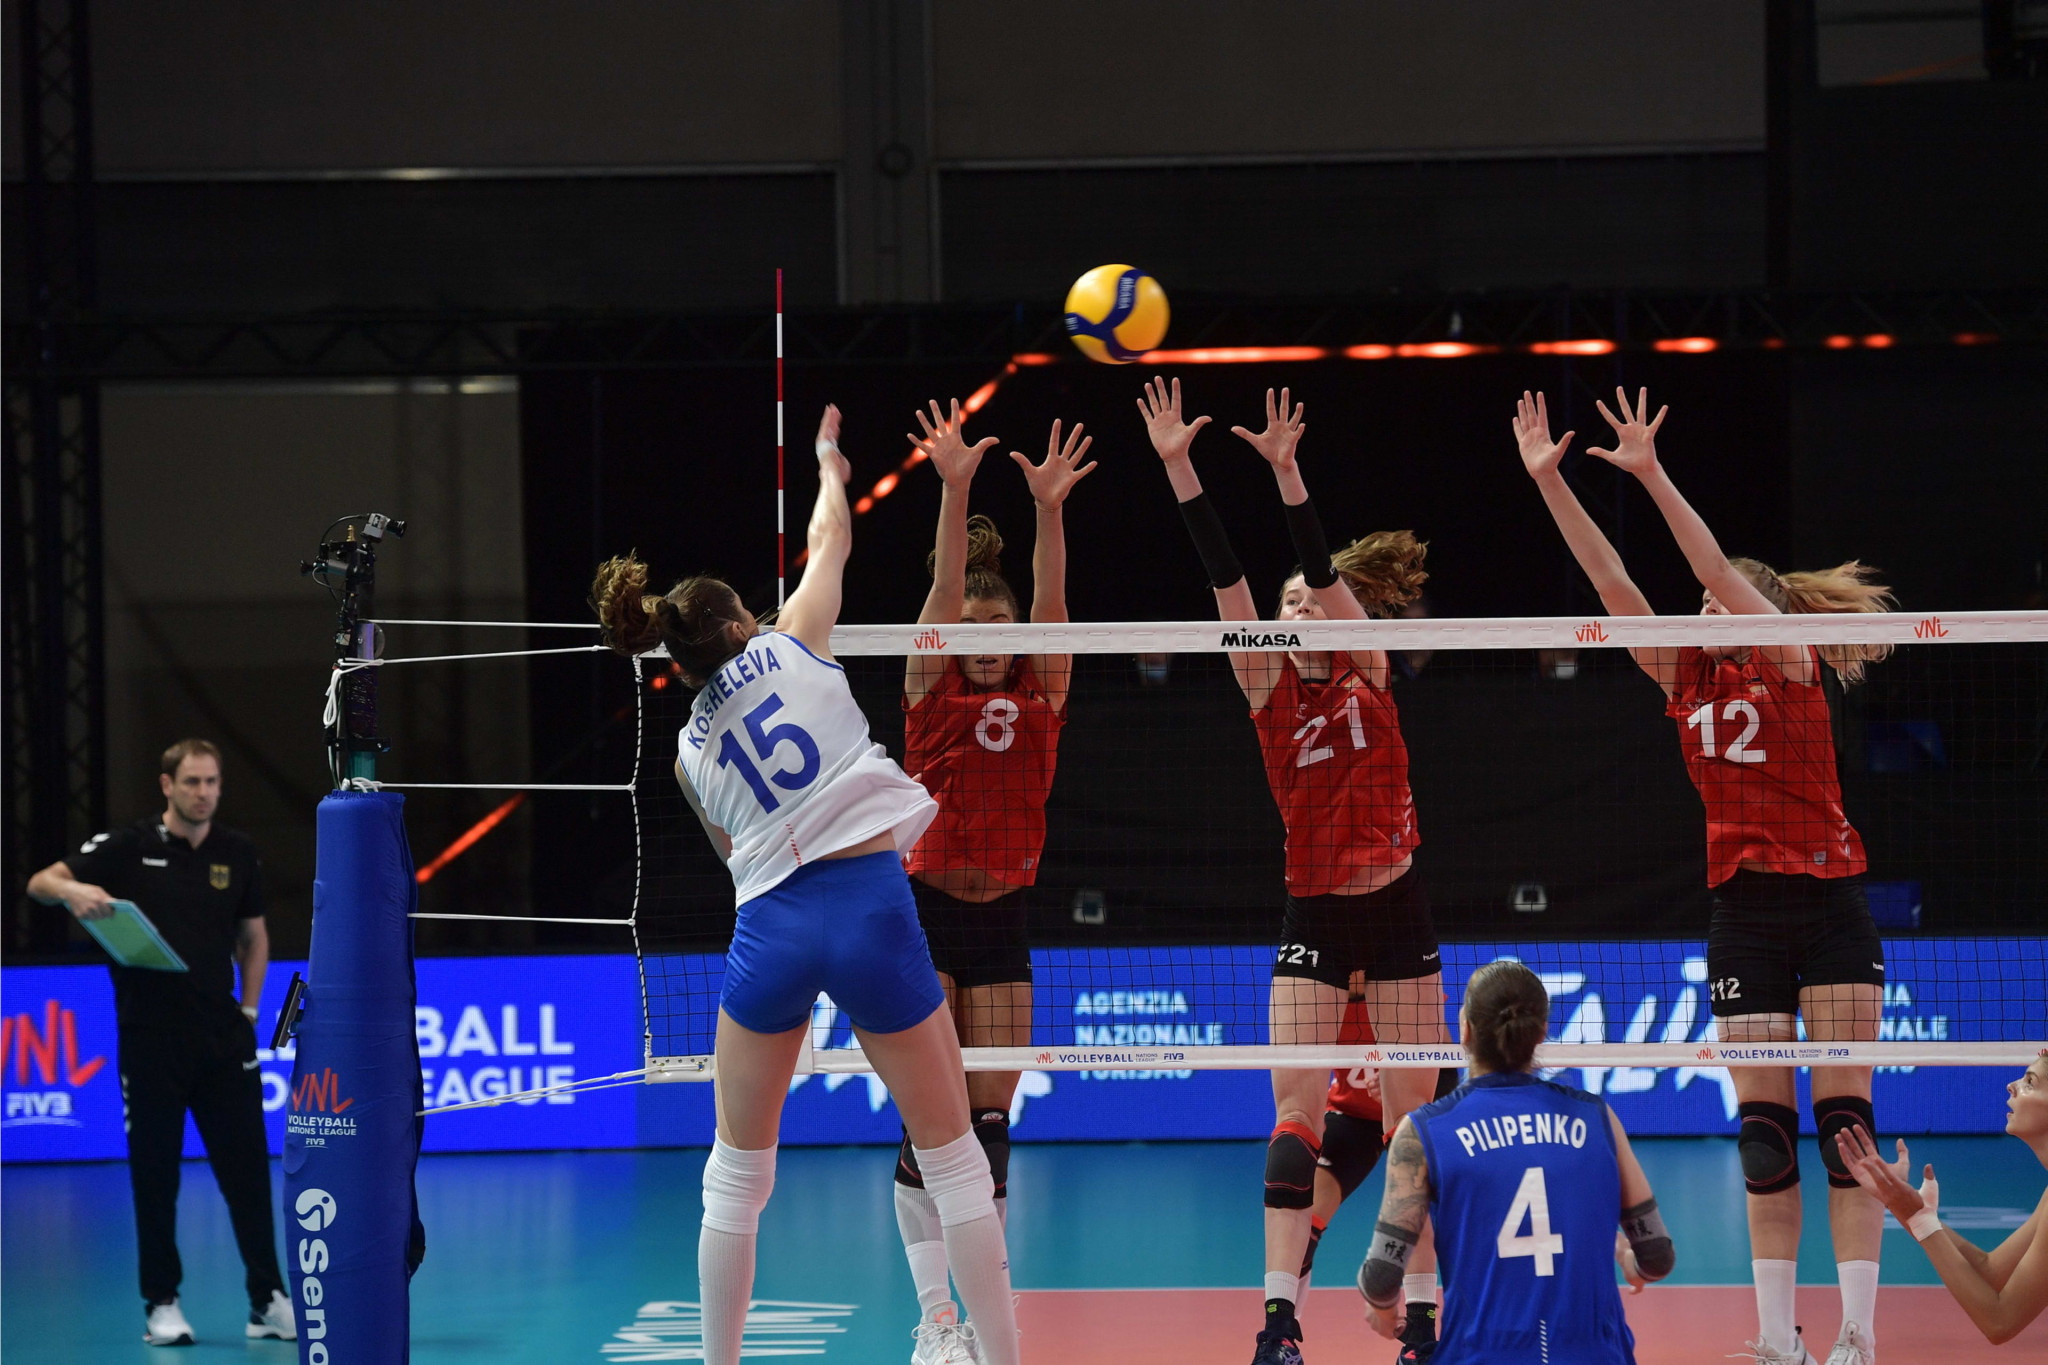 Russia, in white, were today beaten in four sets by the Netherlands, and currently sit in the middle of the Nations League table ©Volleyball World